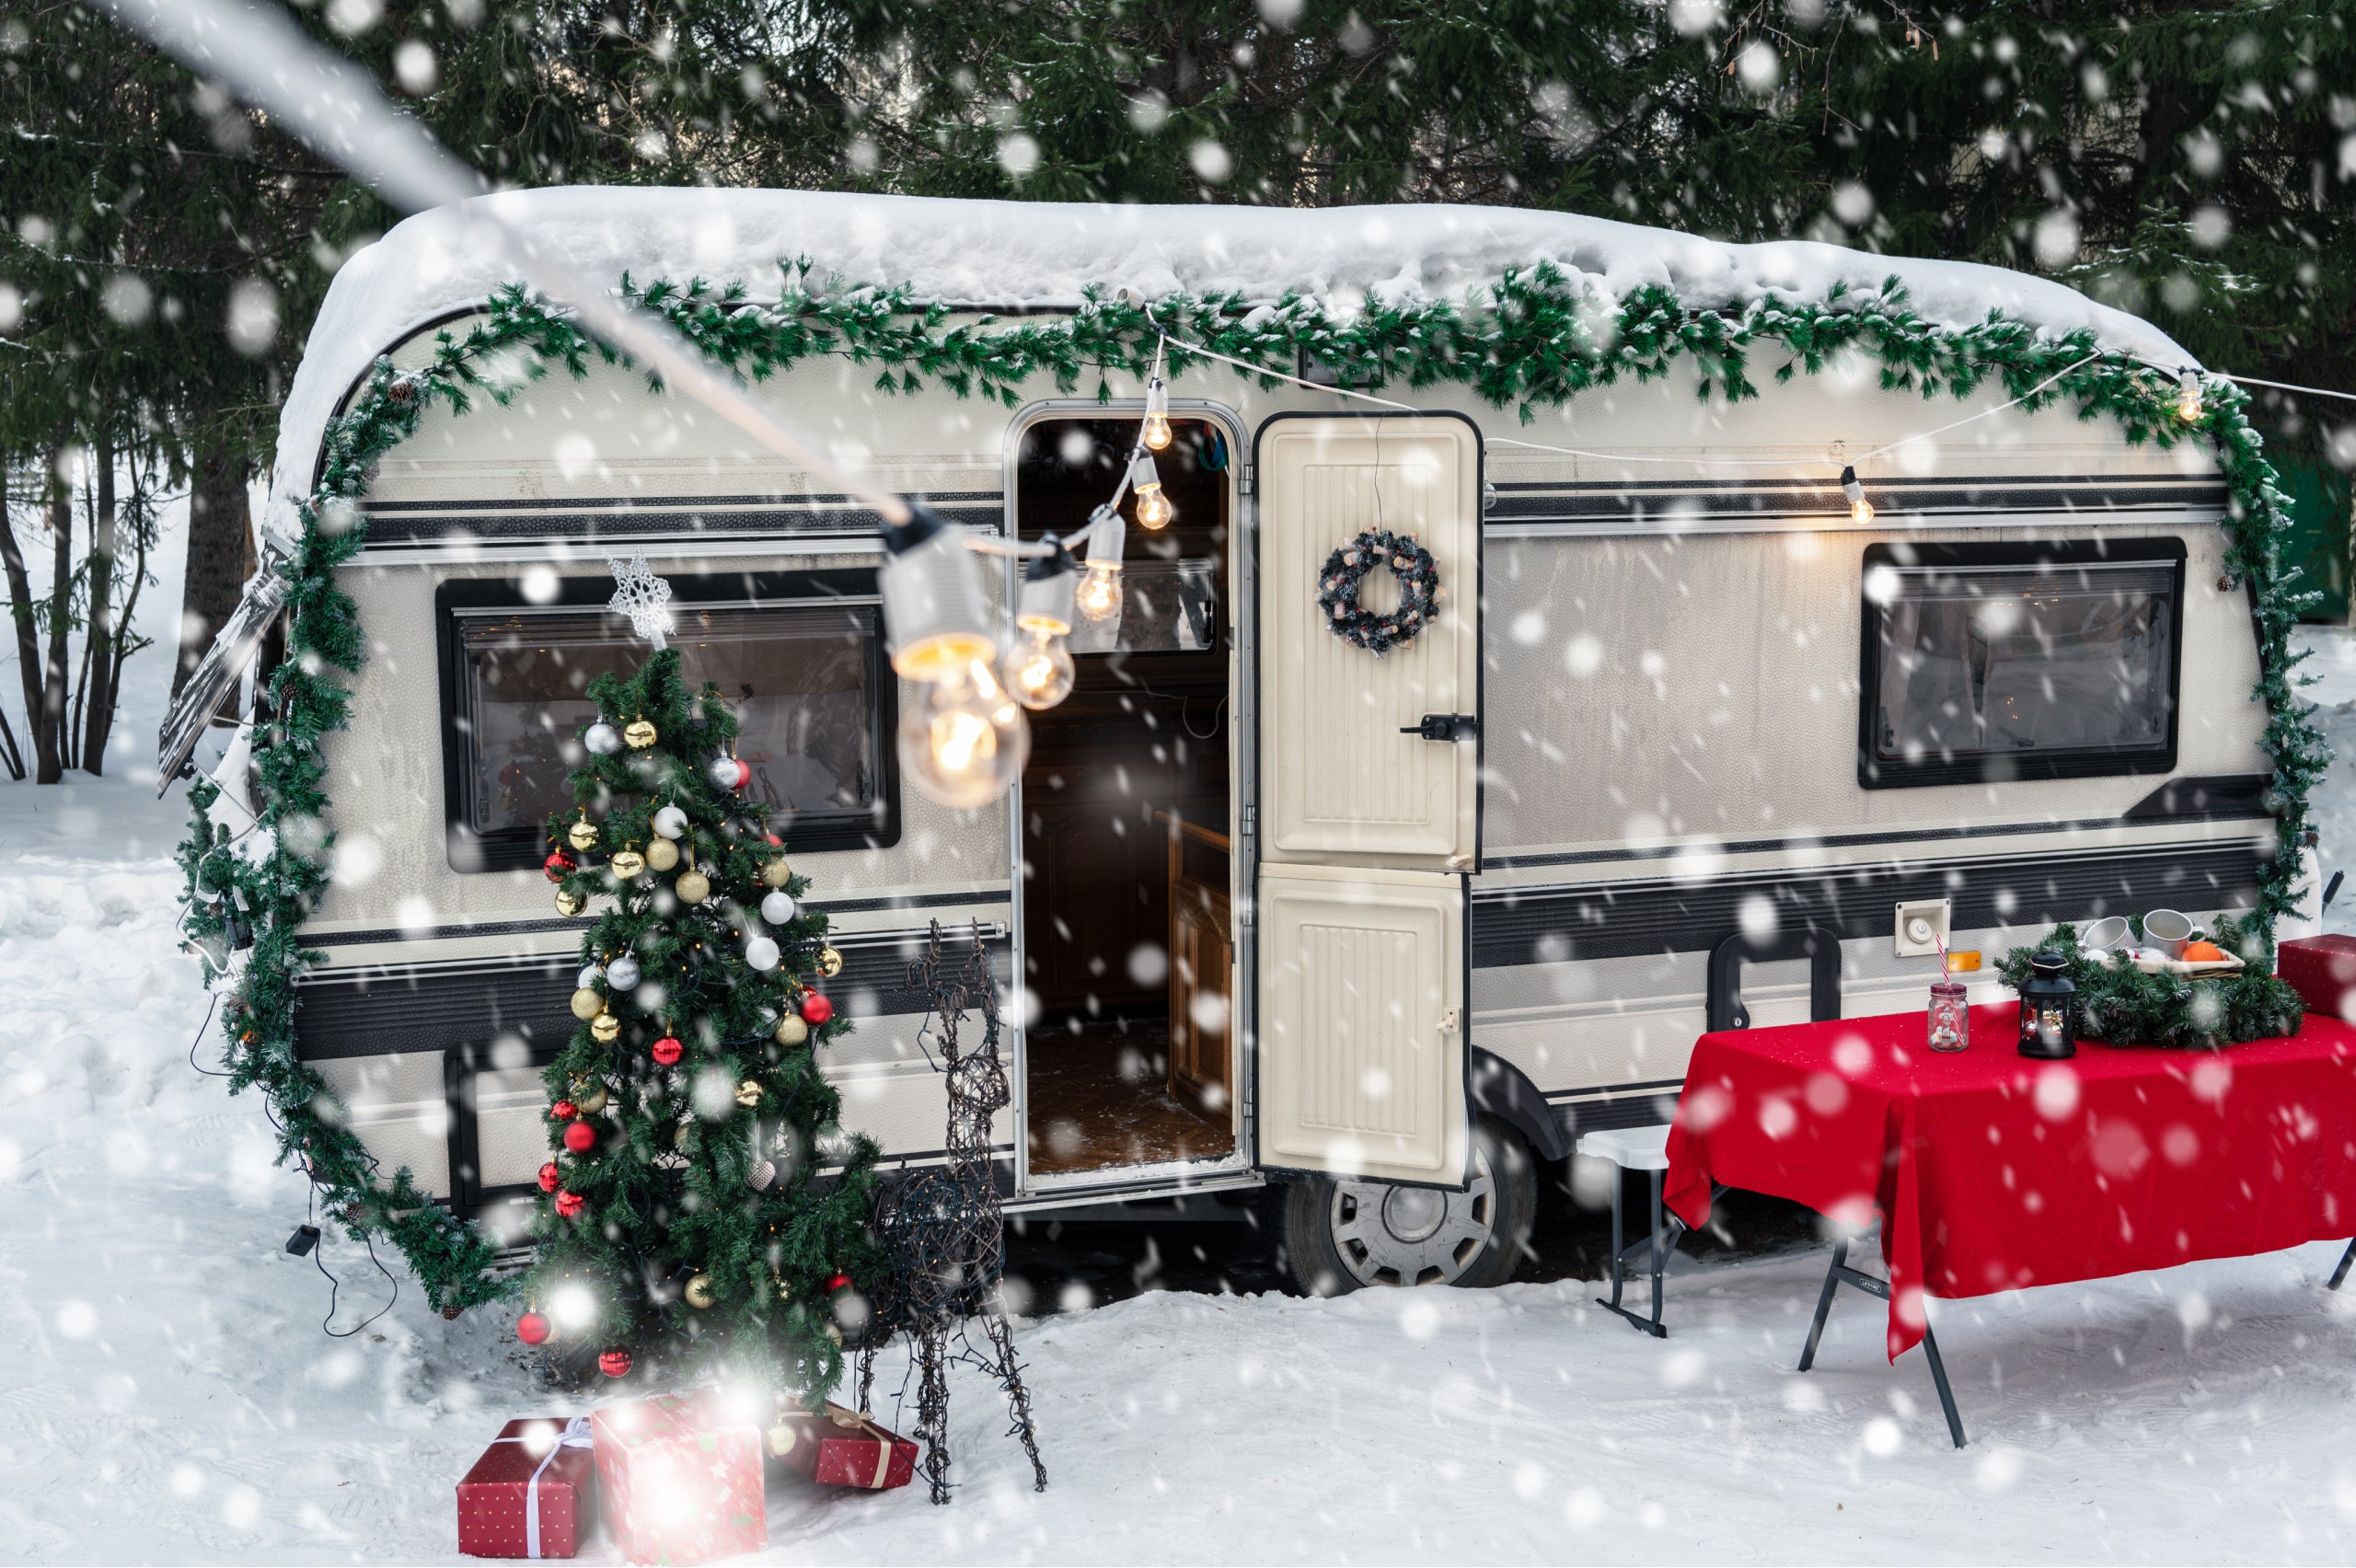 Campervan motorhome in winter camping decorated